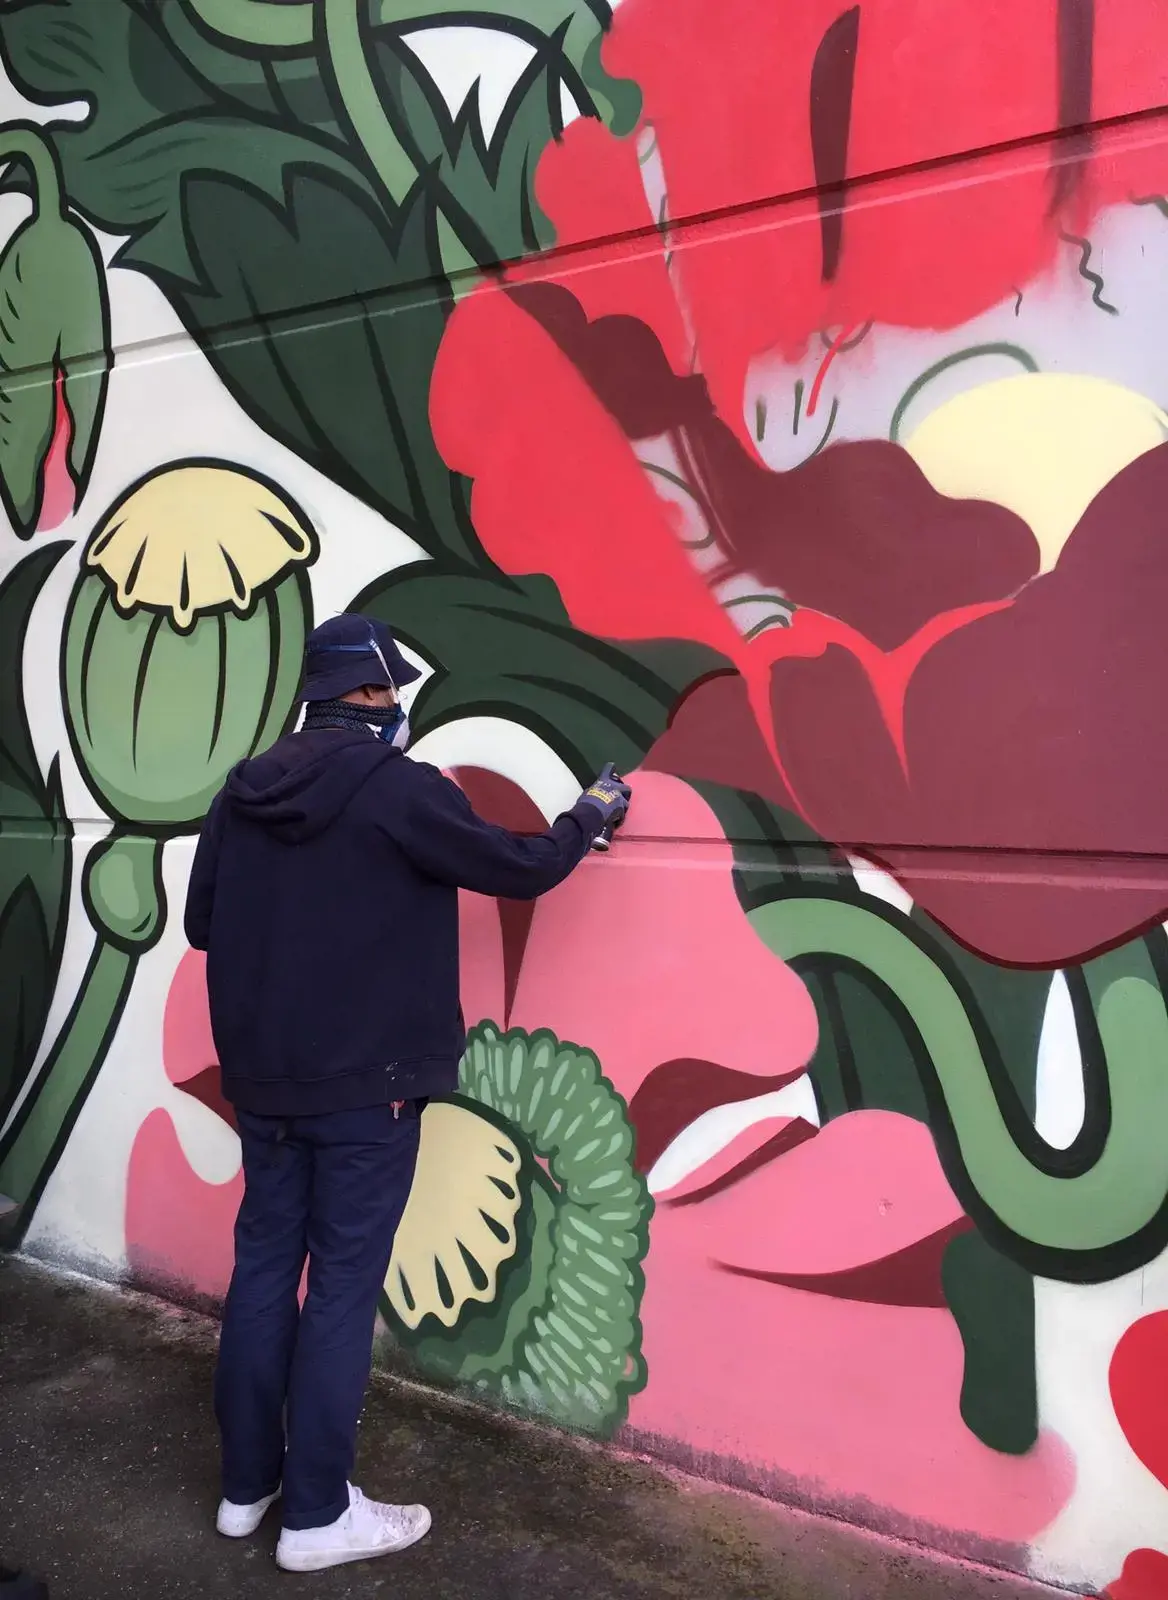 An artist working on a mural as part of the Concrete Canvas project